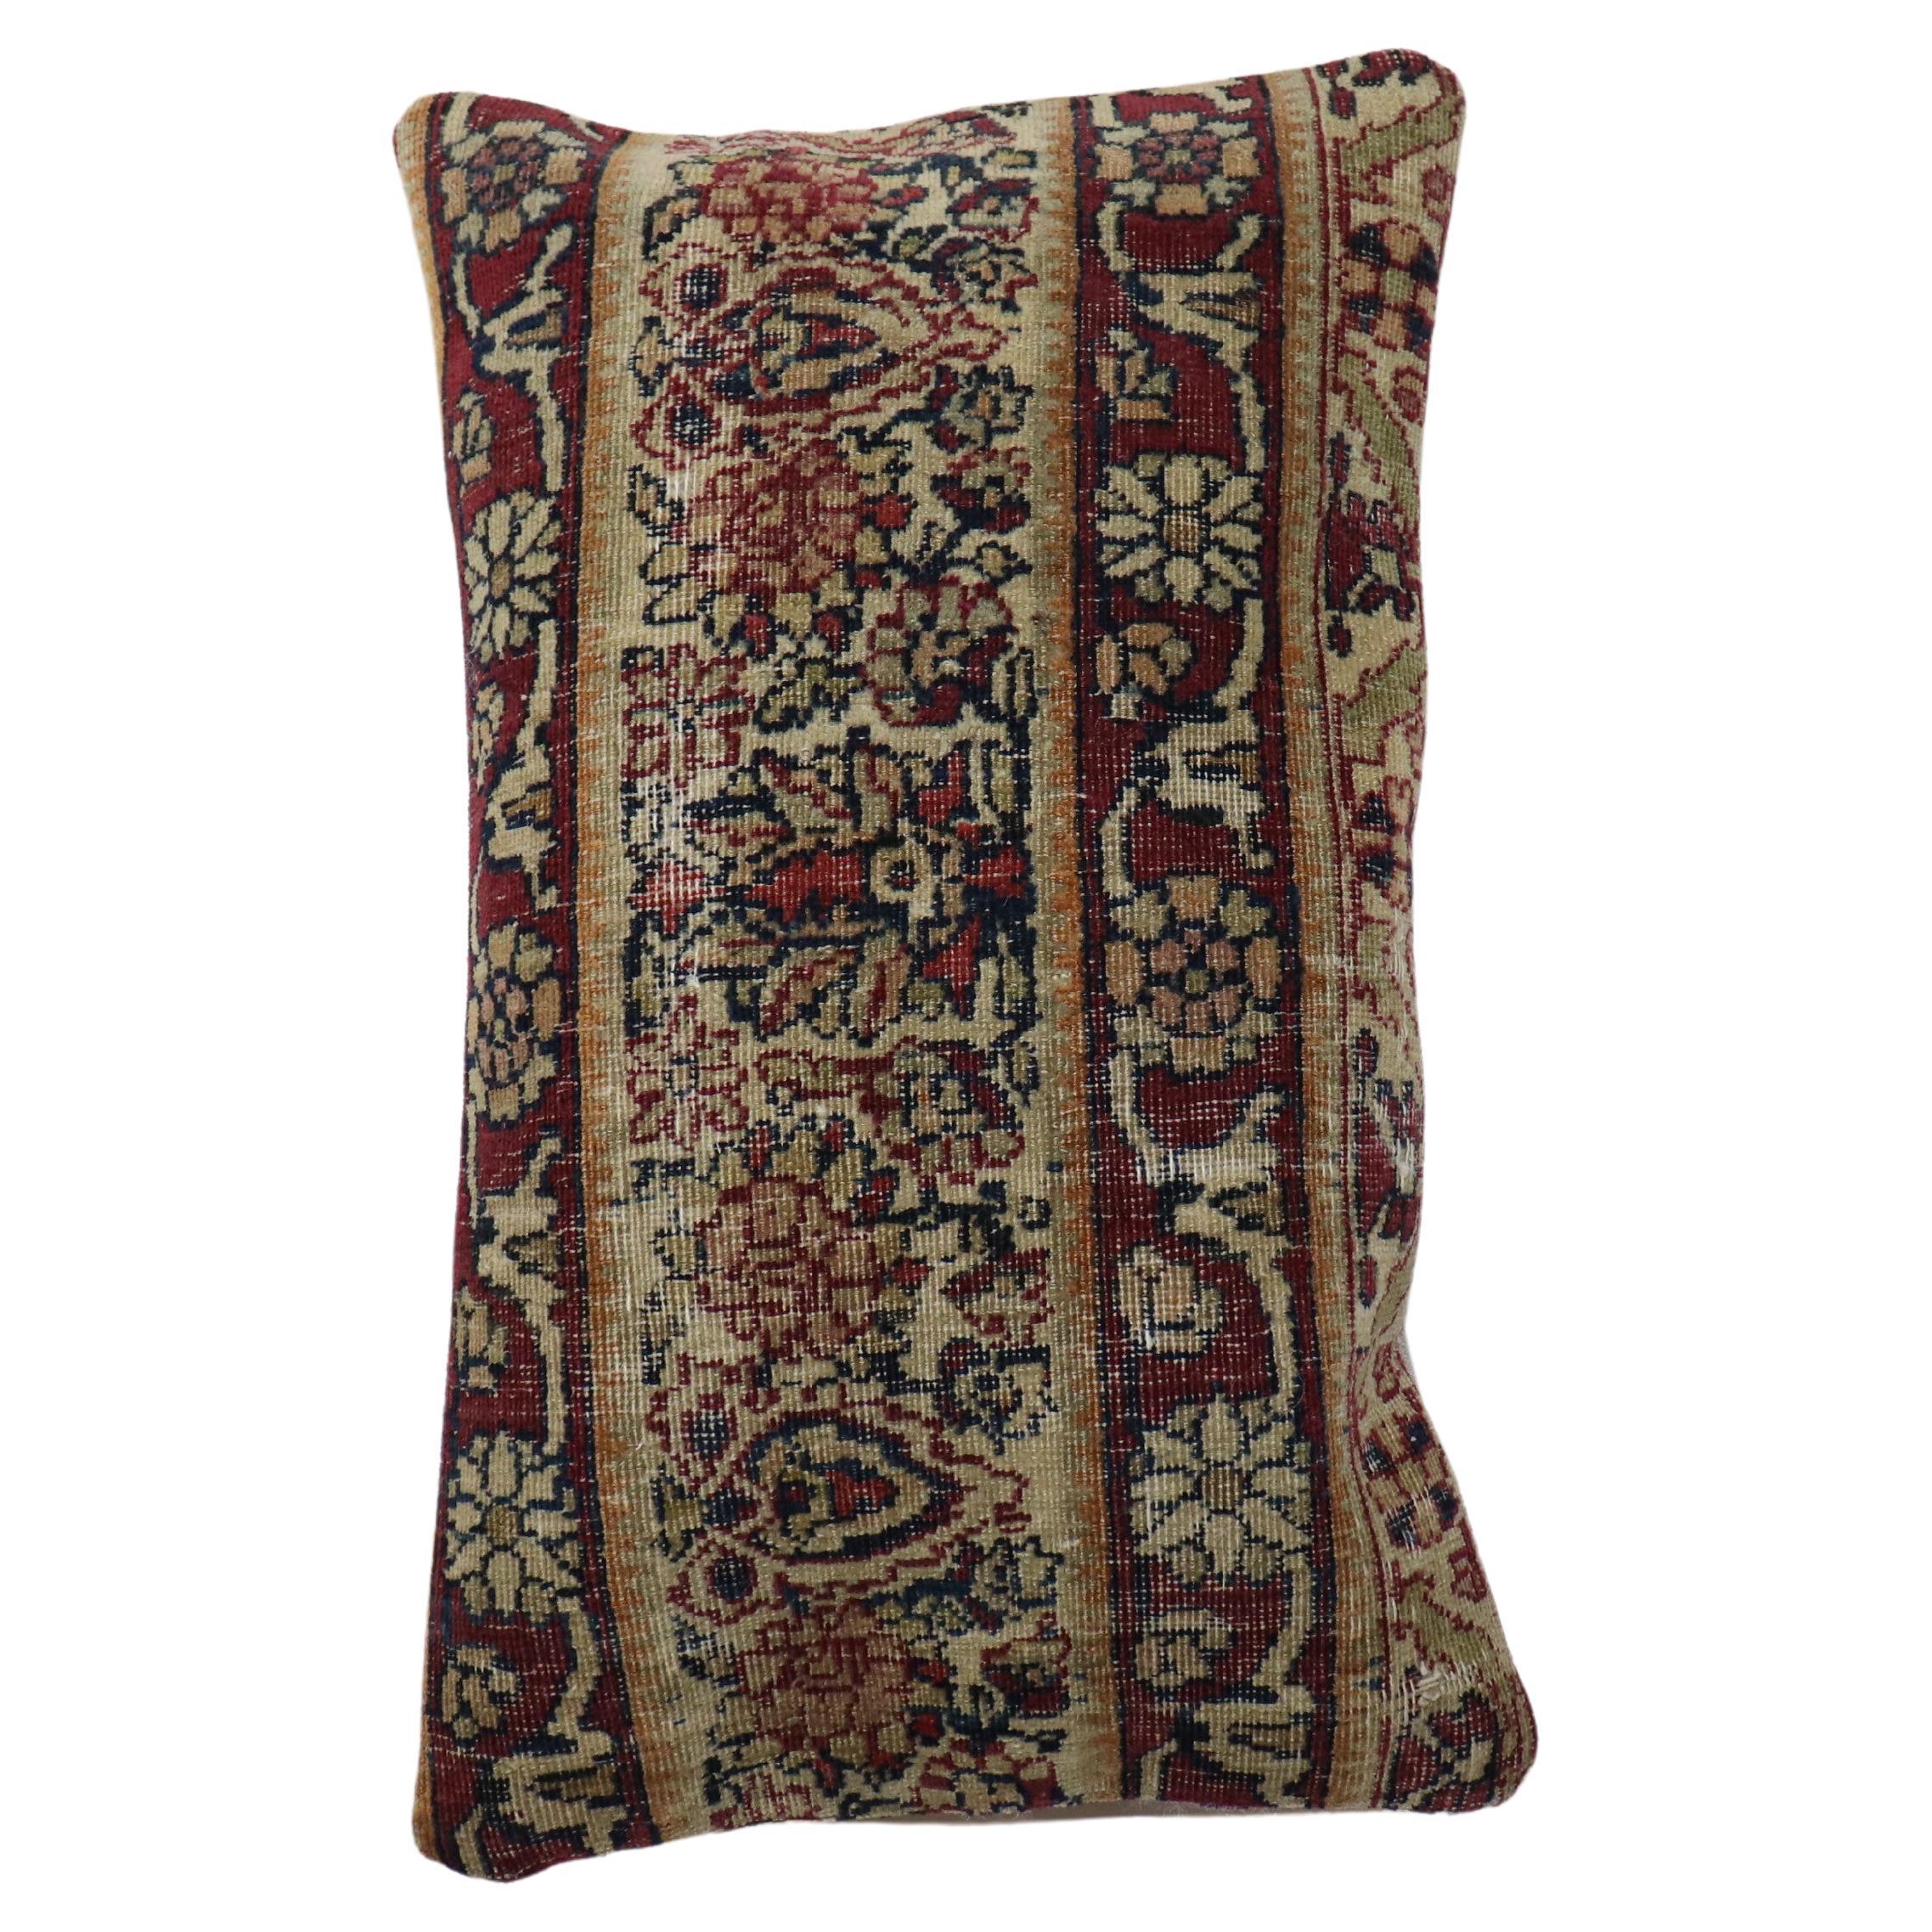 Bolster size Pillow made from a 19th-century Persian Kerman rug. Fill insert and zipper closure provided

Measures: 12